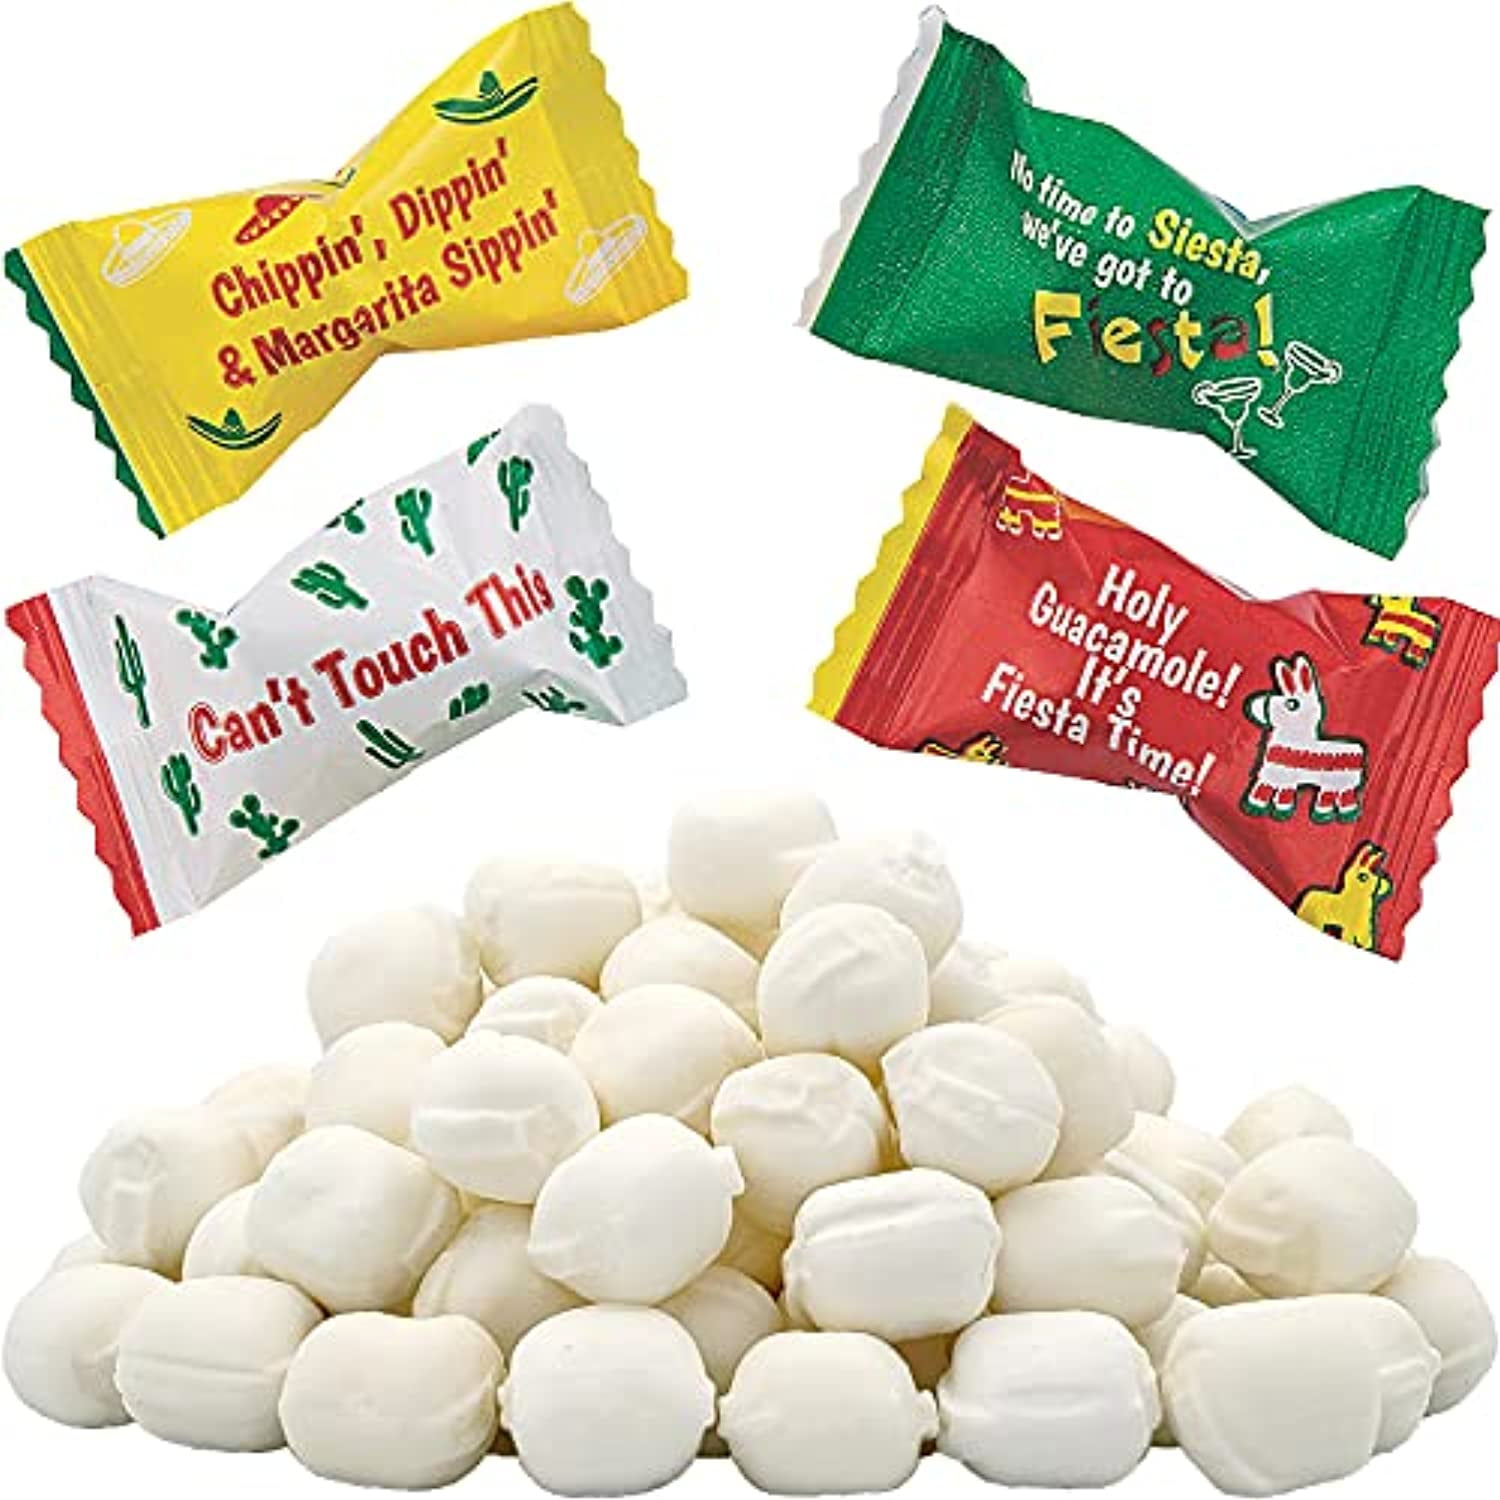 Fiesta Buttermints, Mint Candies, After Dinner Mints, Butter Mint Candy, Fat -Free, Kosher Certified, Individually Wrapped (55 Pieces)